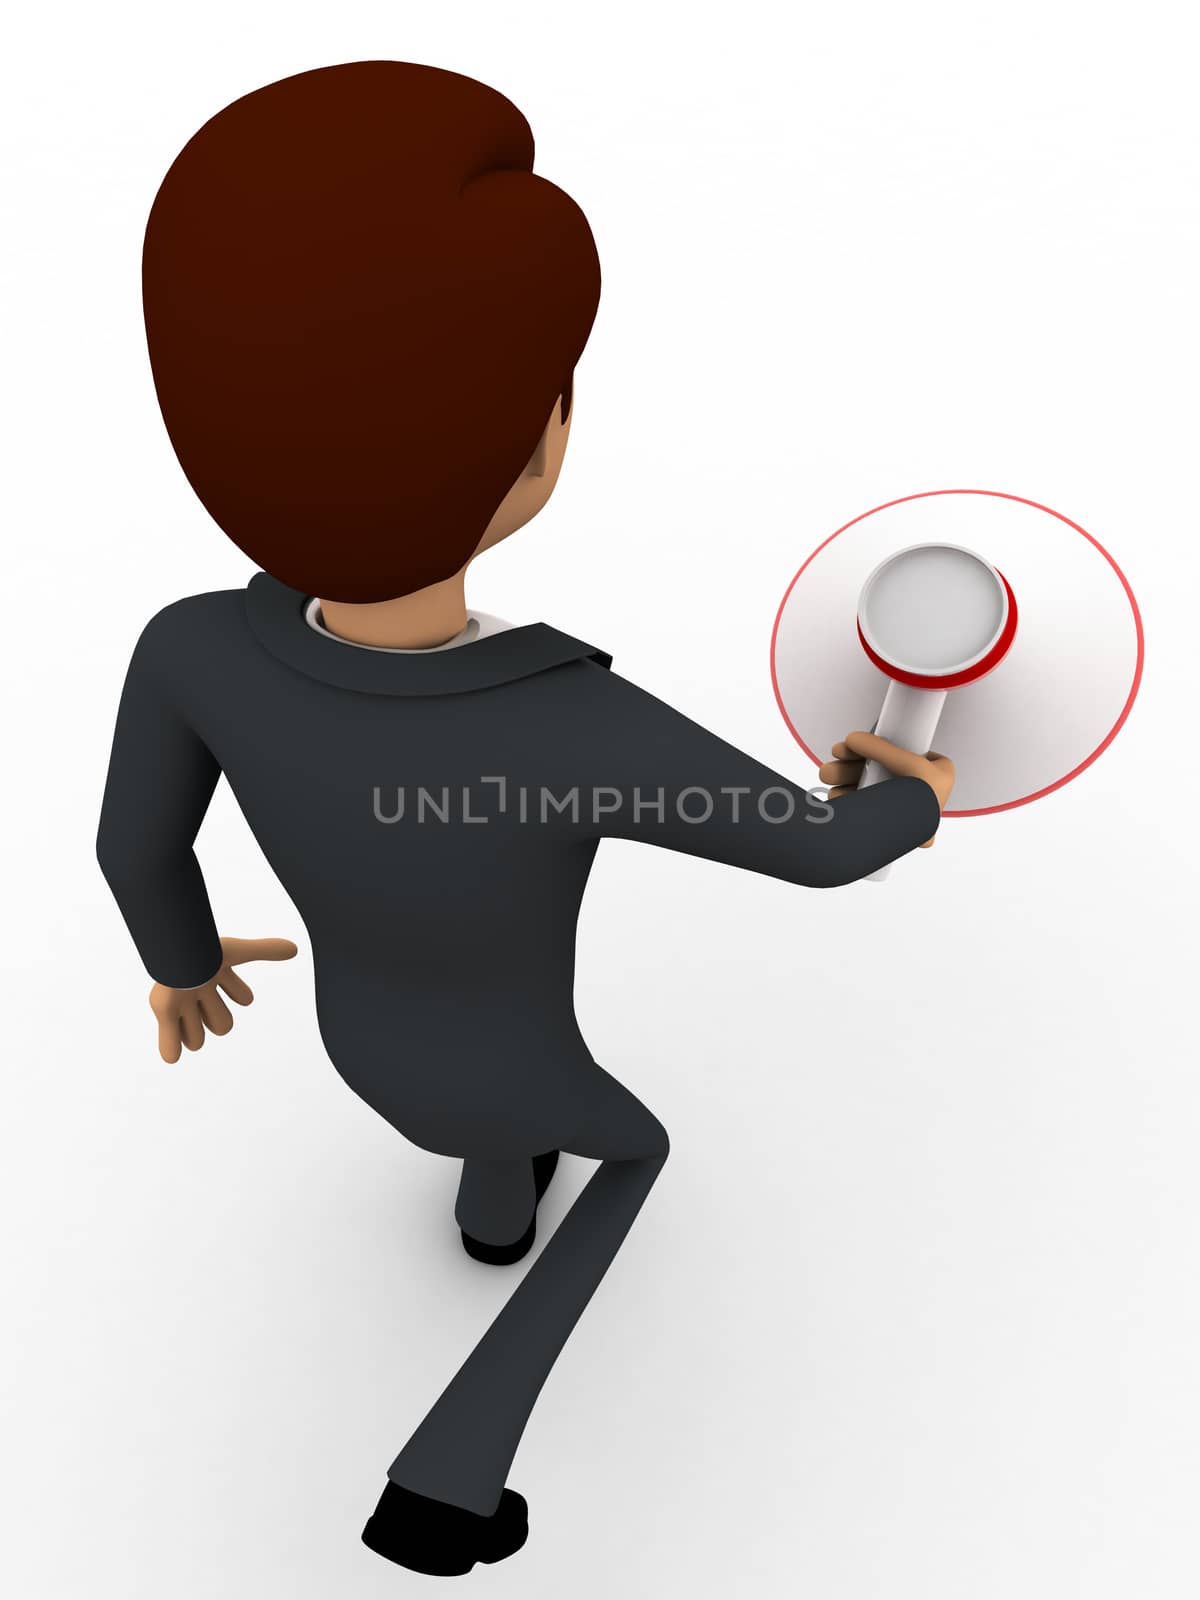 3d man walking with speaker in hand concept by touchmenithin@gmail.com